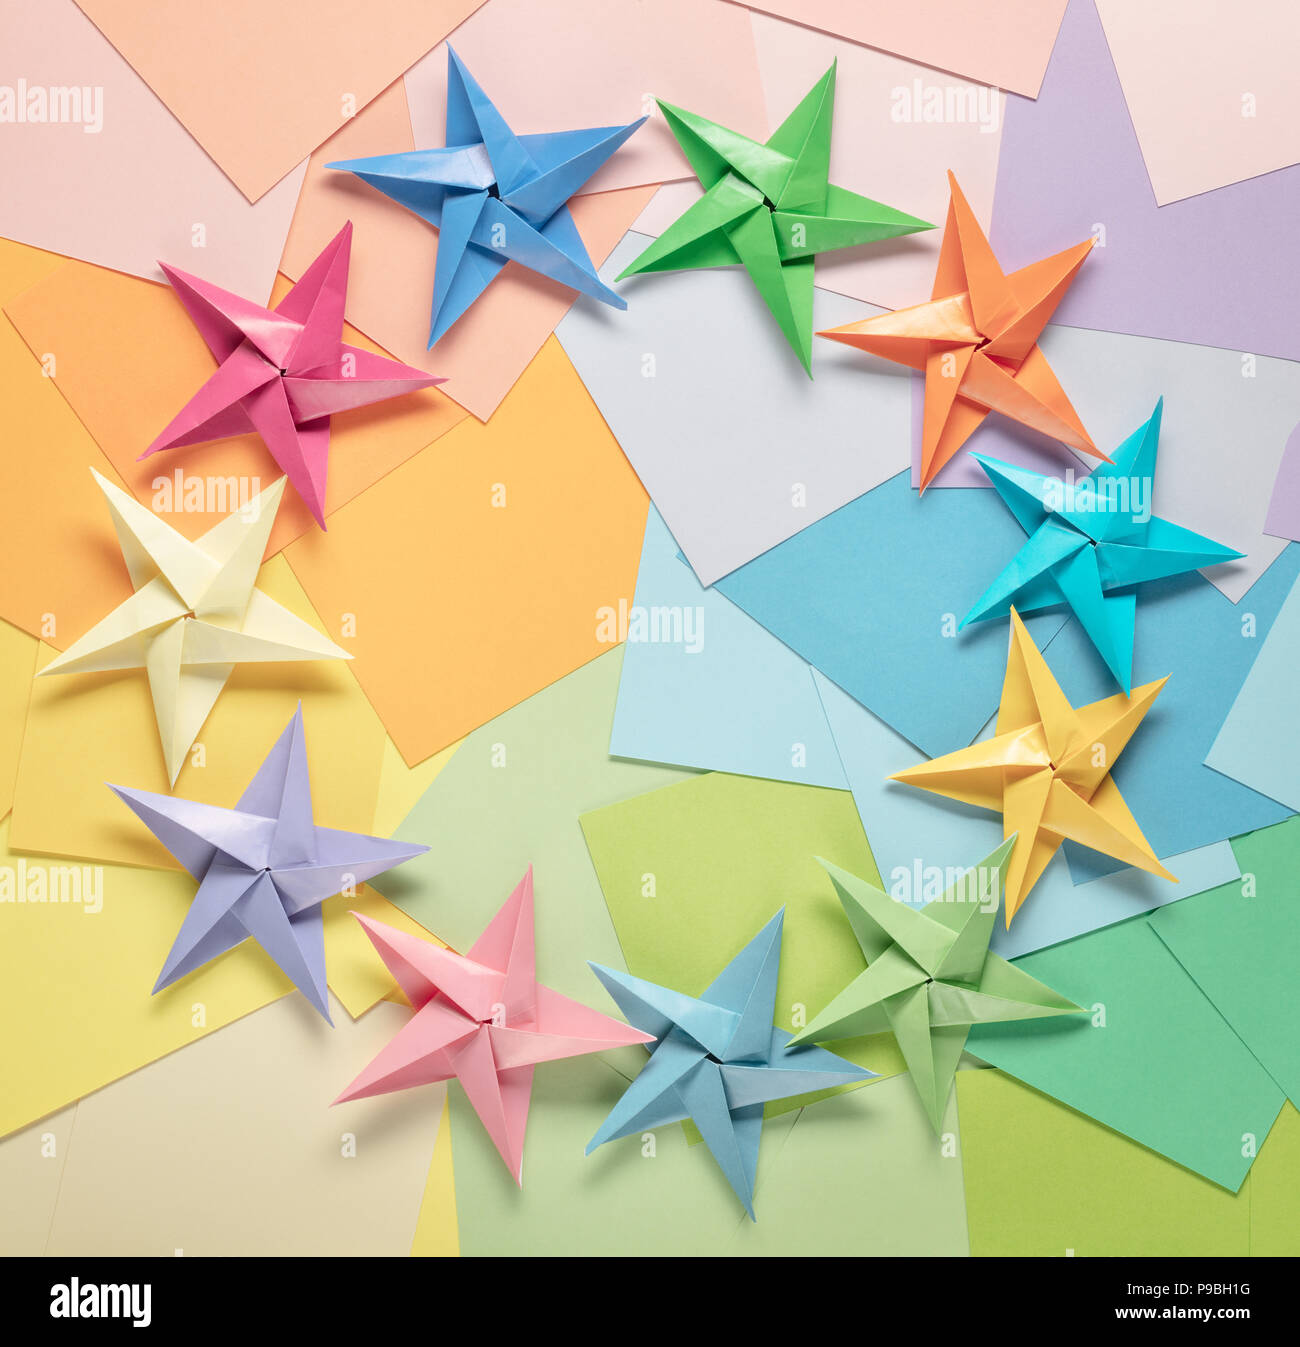 multi-pastel colored paper and paper stars Stock Photo